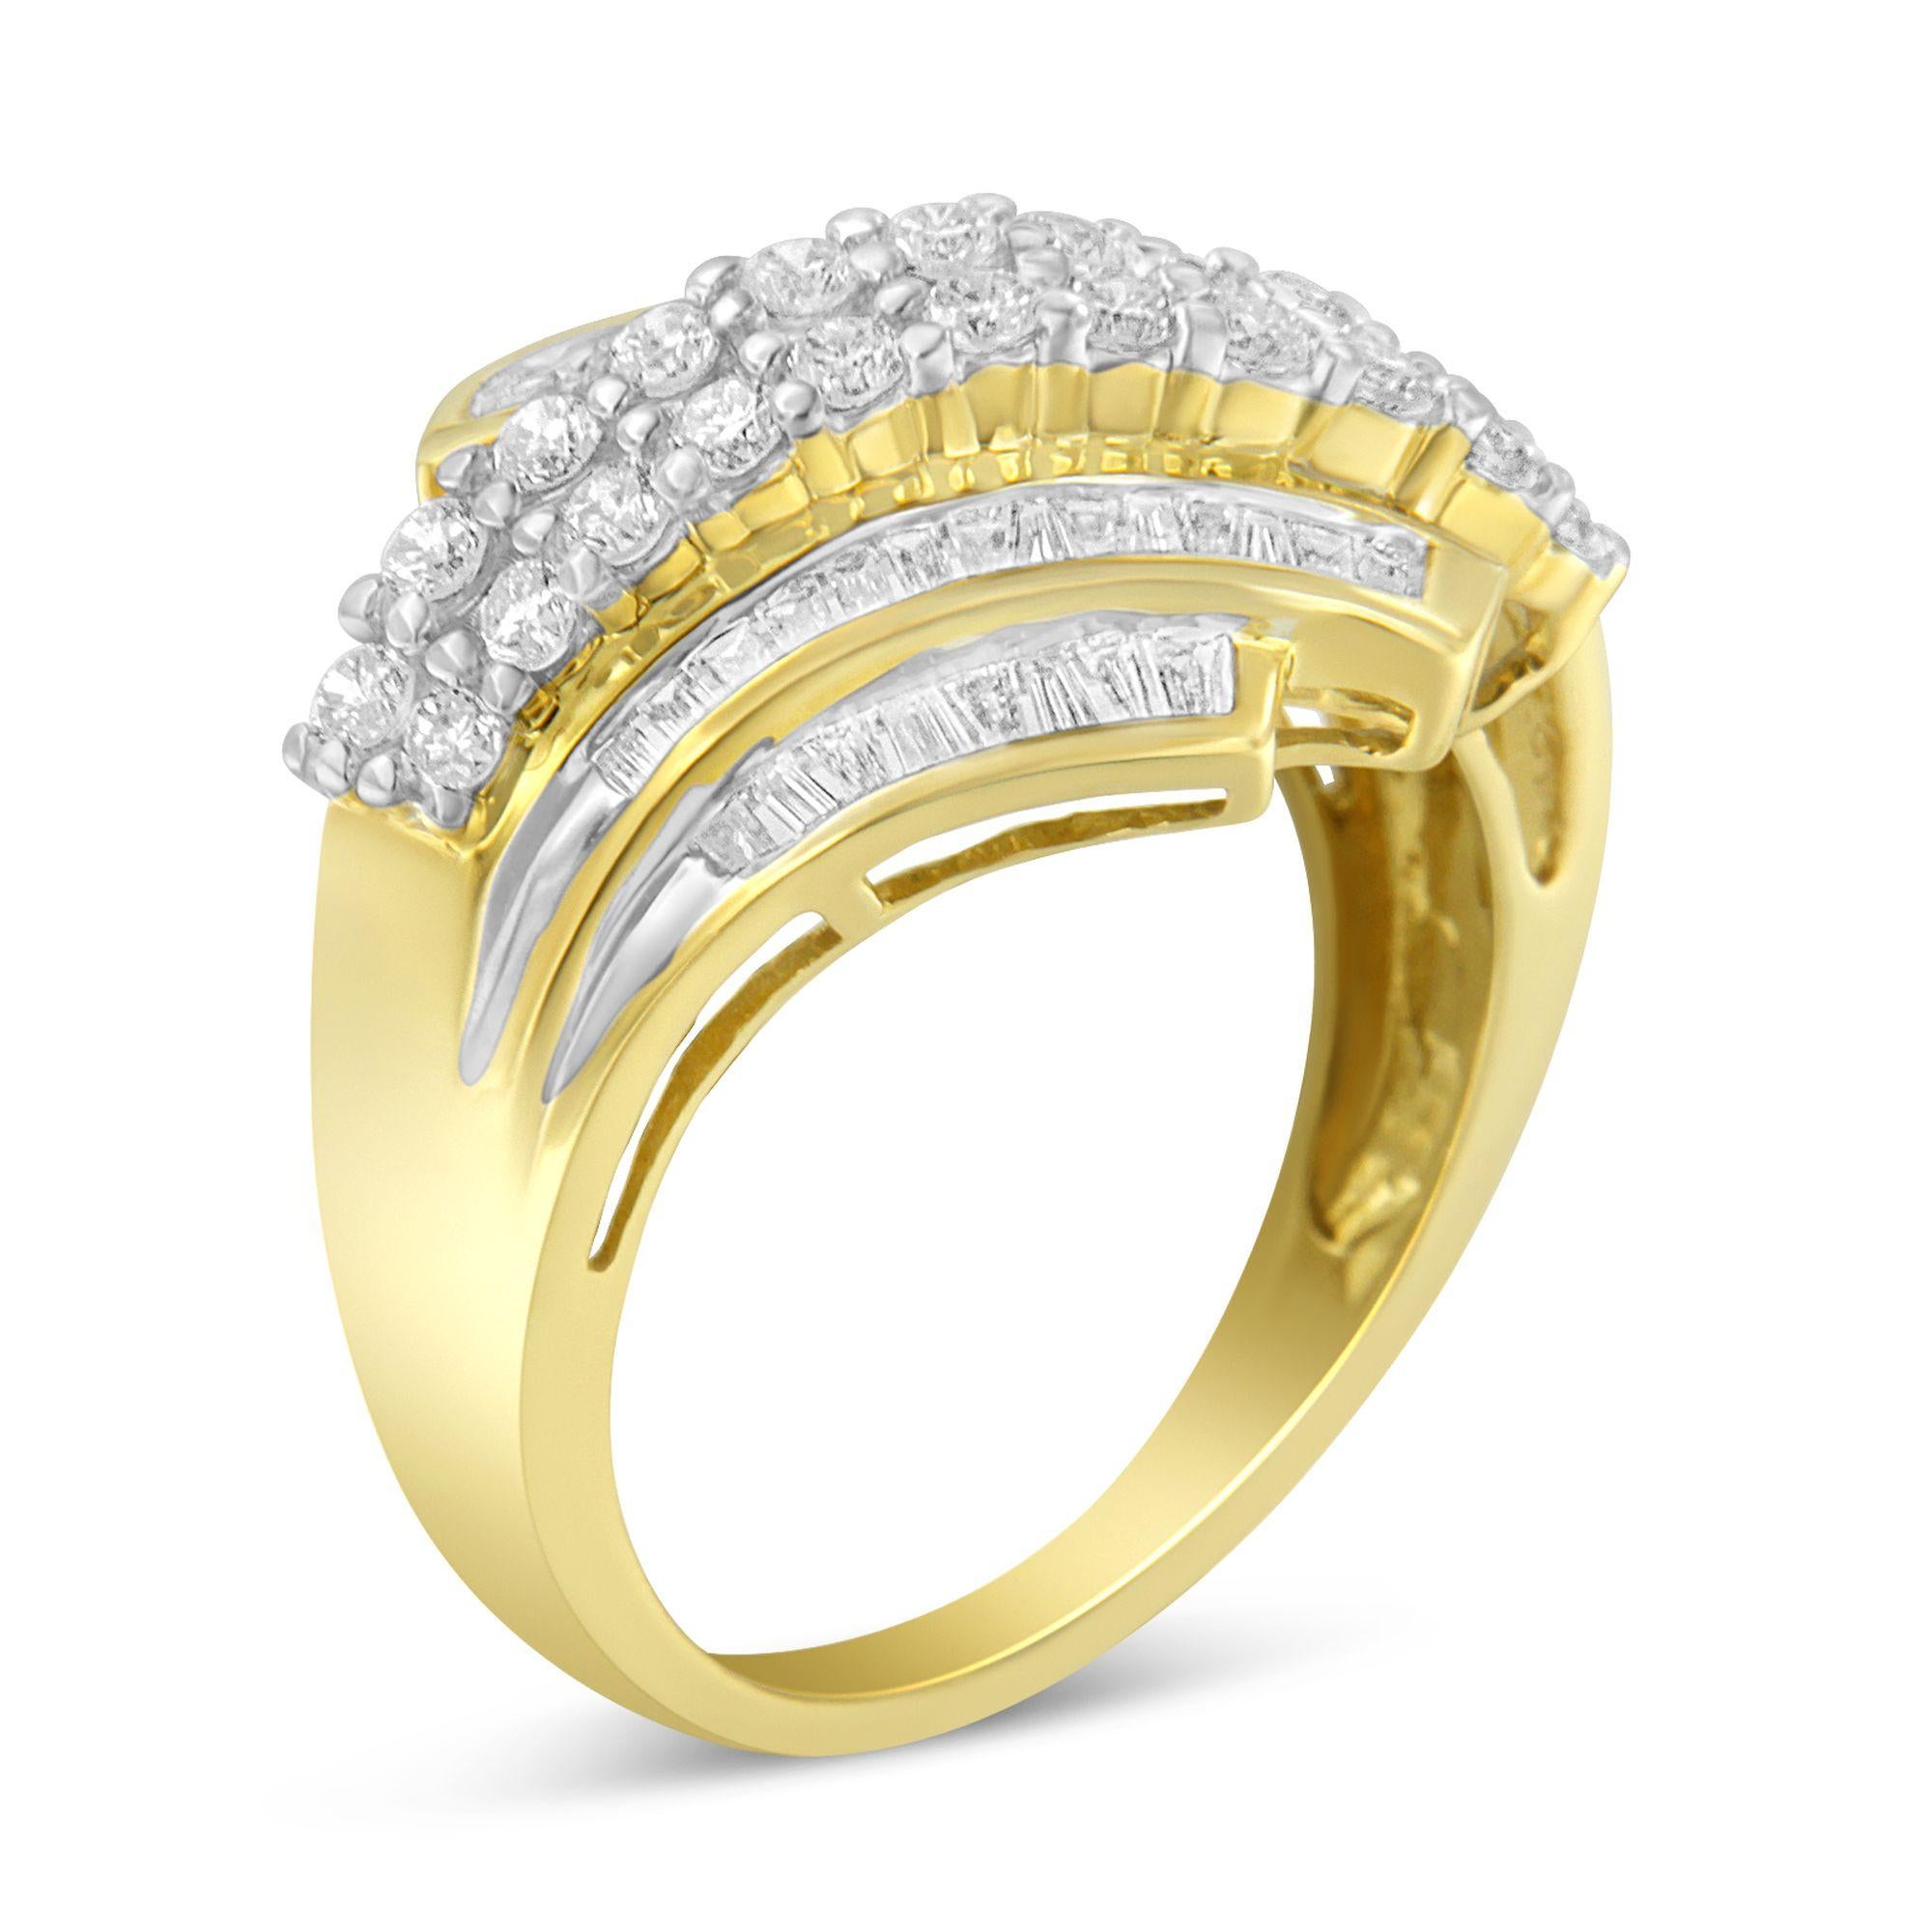 Elegant and timeless, this 10K yellow gold diamond statement ring features 1.0 carat total weight of diamonds with 64 individual stones. The bypass style fashion ring features a two row wave of round, brilliant cut diamonds in shared prong settings